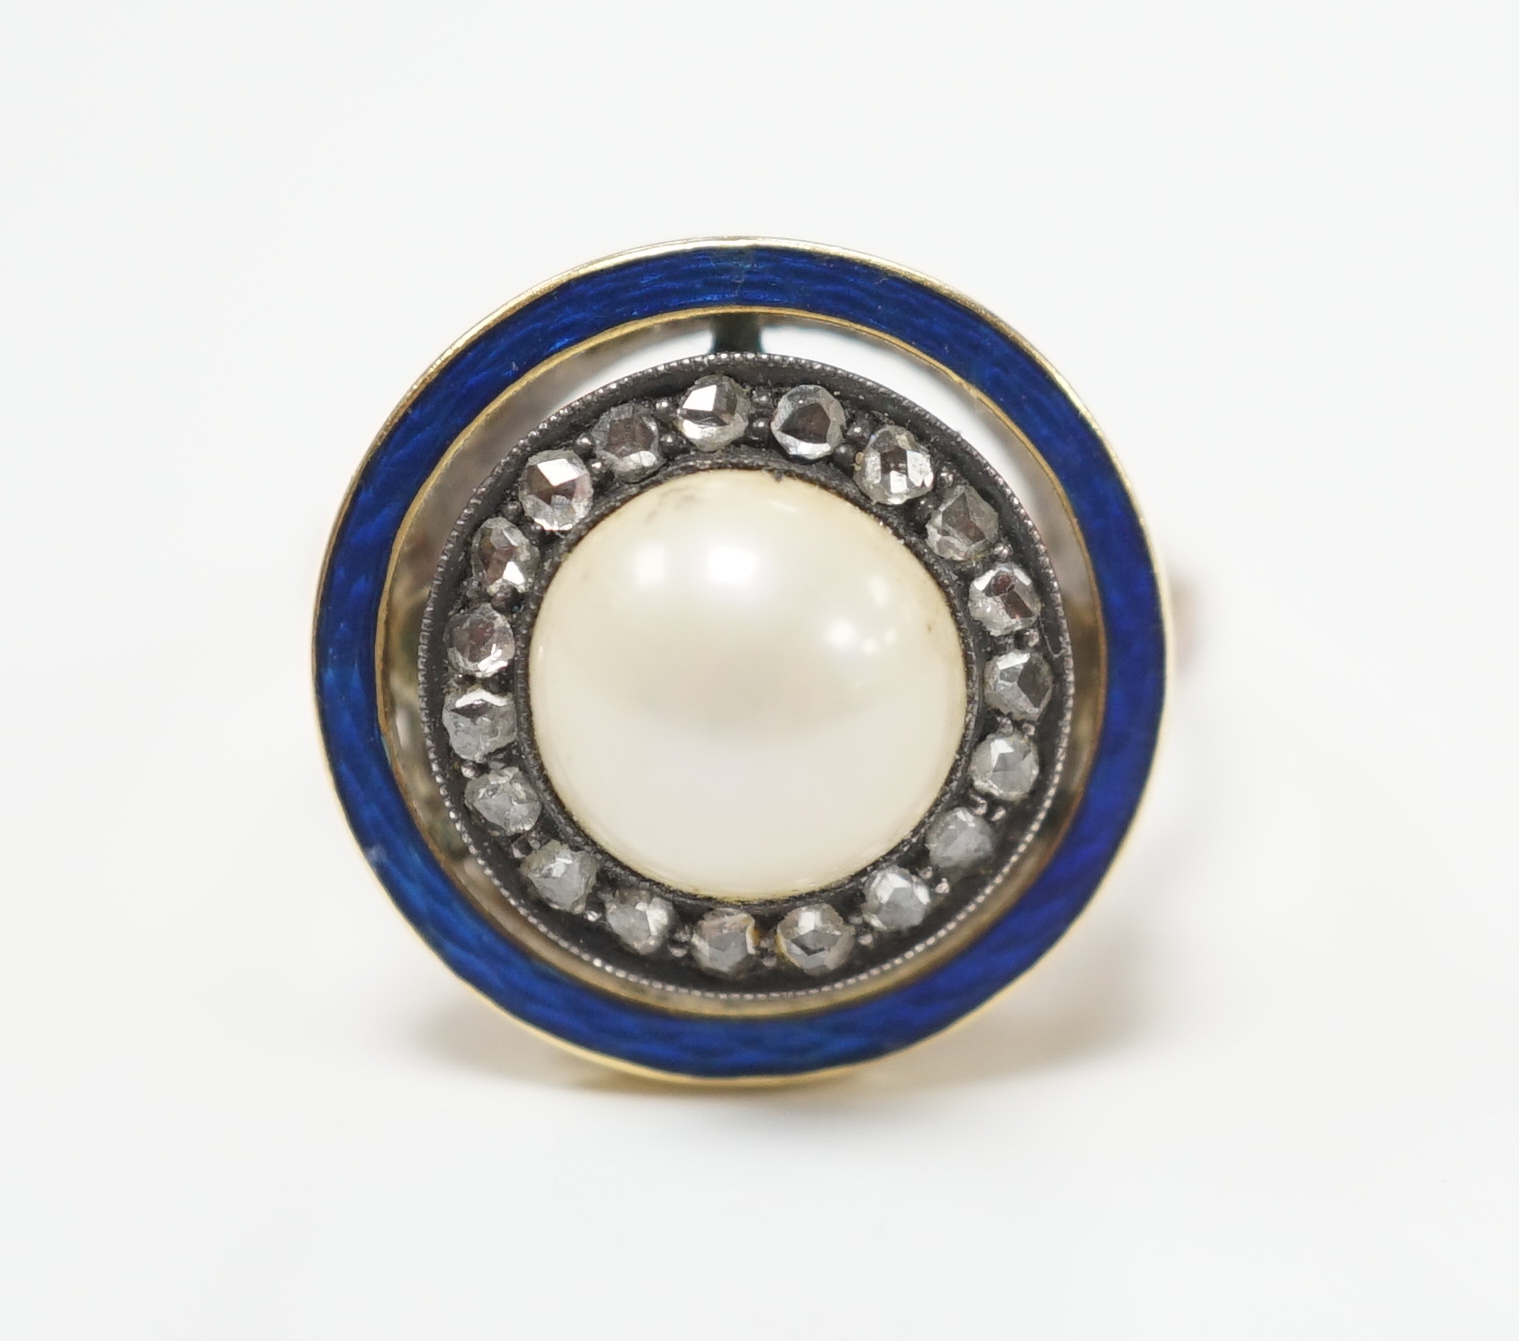 An early to mid 20th century yellow metal, split pearl, rose cut diamond chip and blue enamel set target ring, size H, ross weight 4.6 grams.